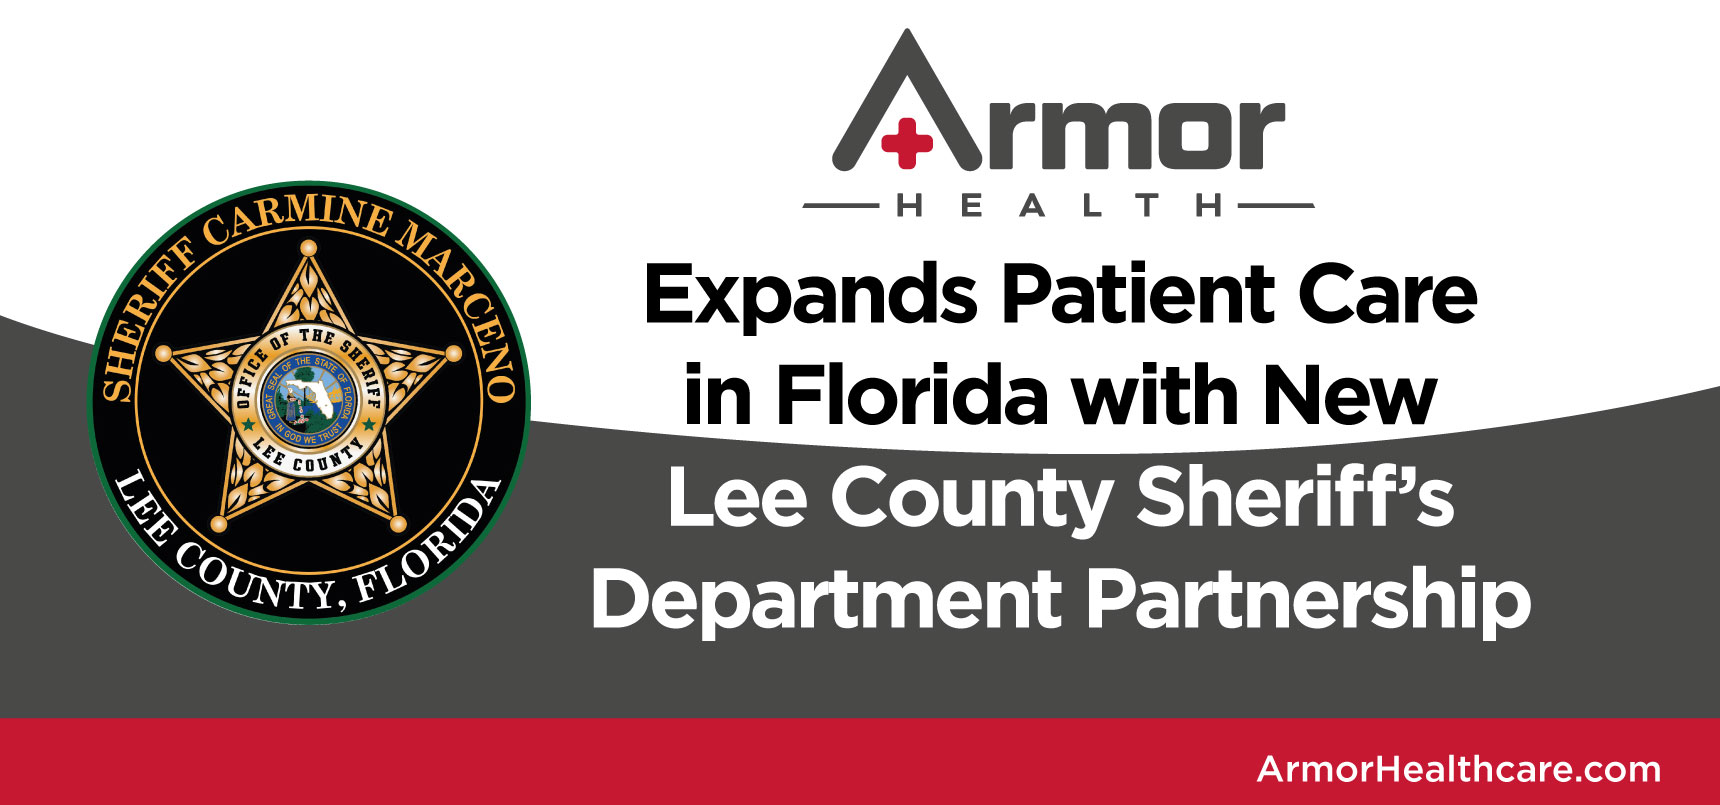 Armor Health’s Data Driven Approach to Patient Care Helps Secure New Agreement to Provide Correctional Healthcare Service to Incarcerated Patients in Lee County Florida